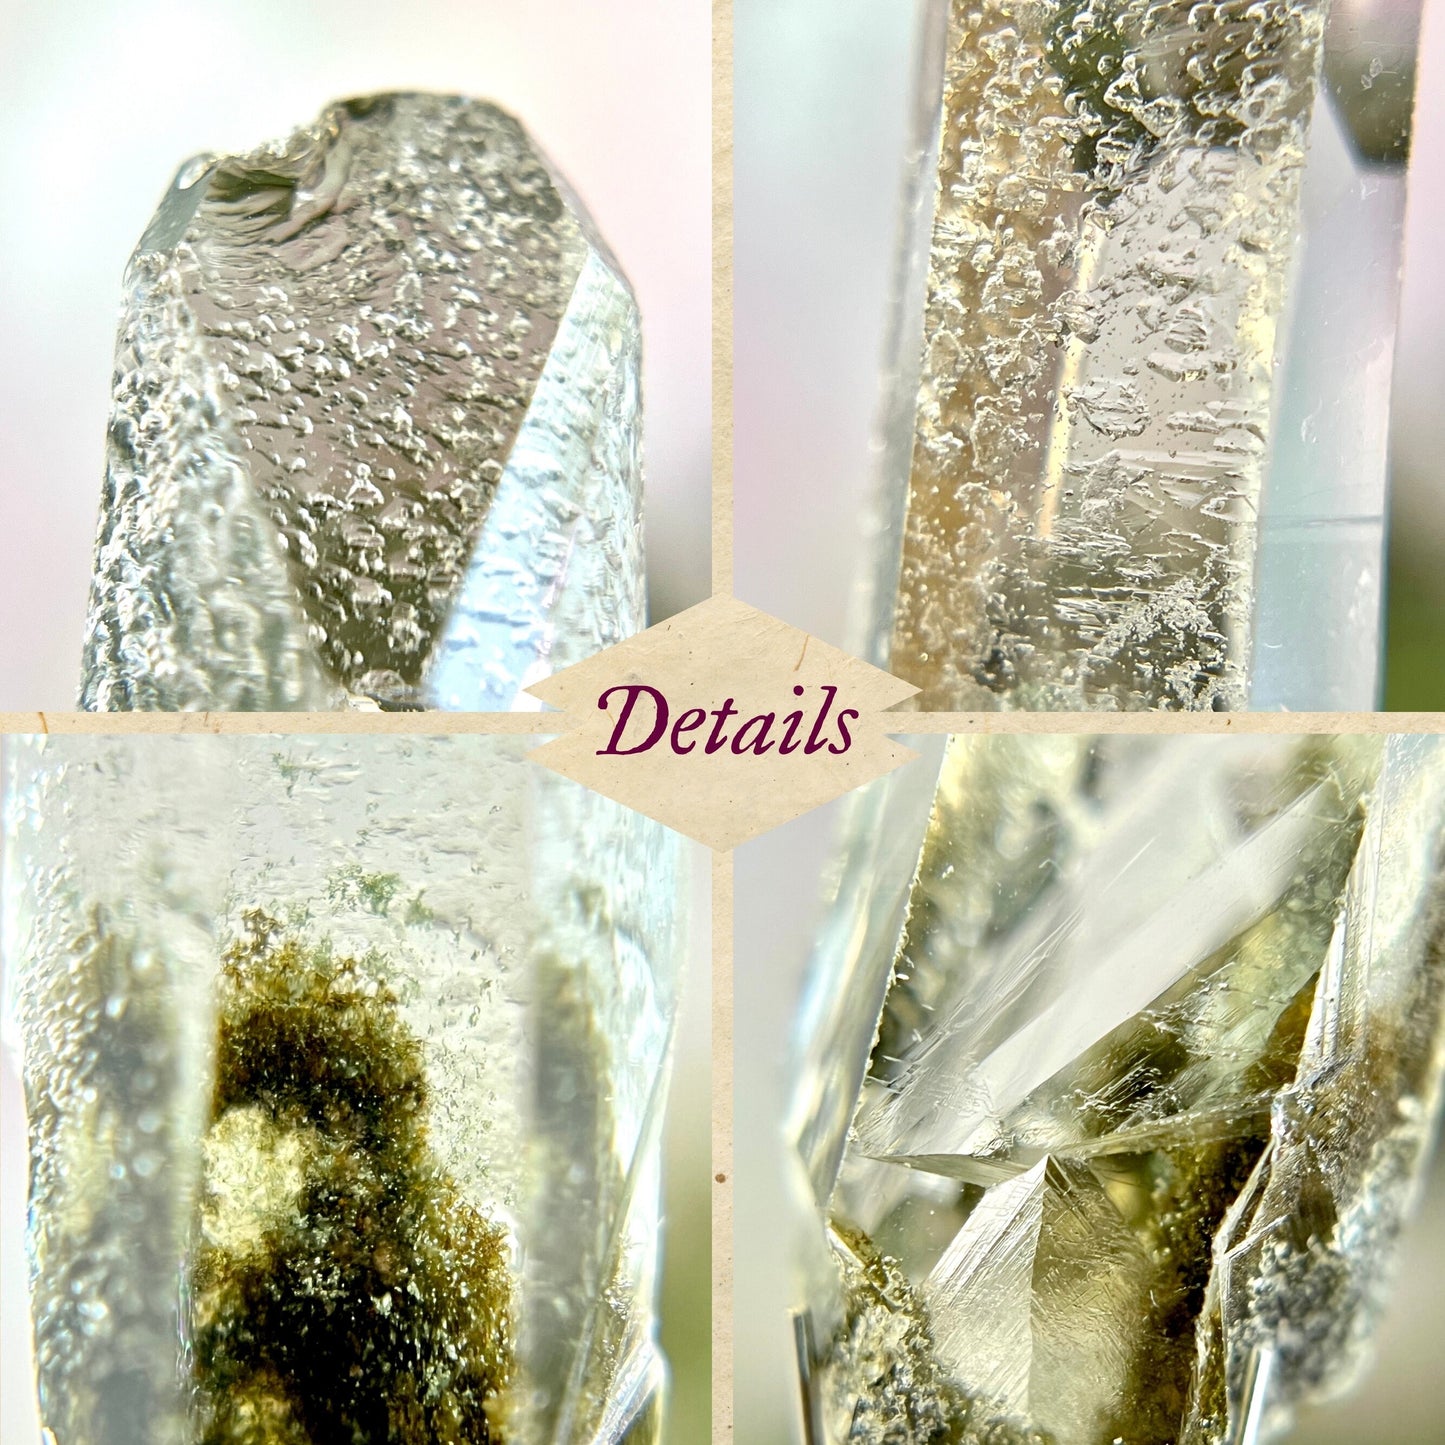 Close up of a small garden Quartz crystal point with chlorite inclusions. This mineral specimen is also called Lodolite, and is natural.